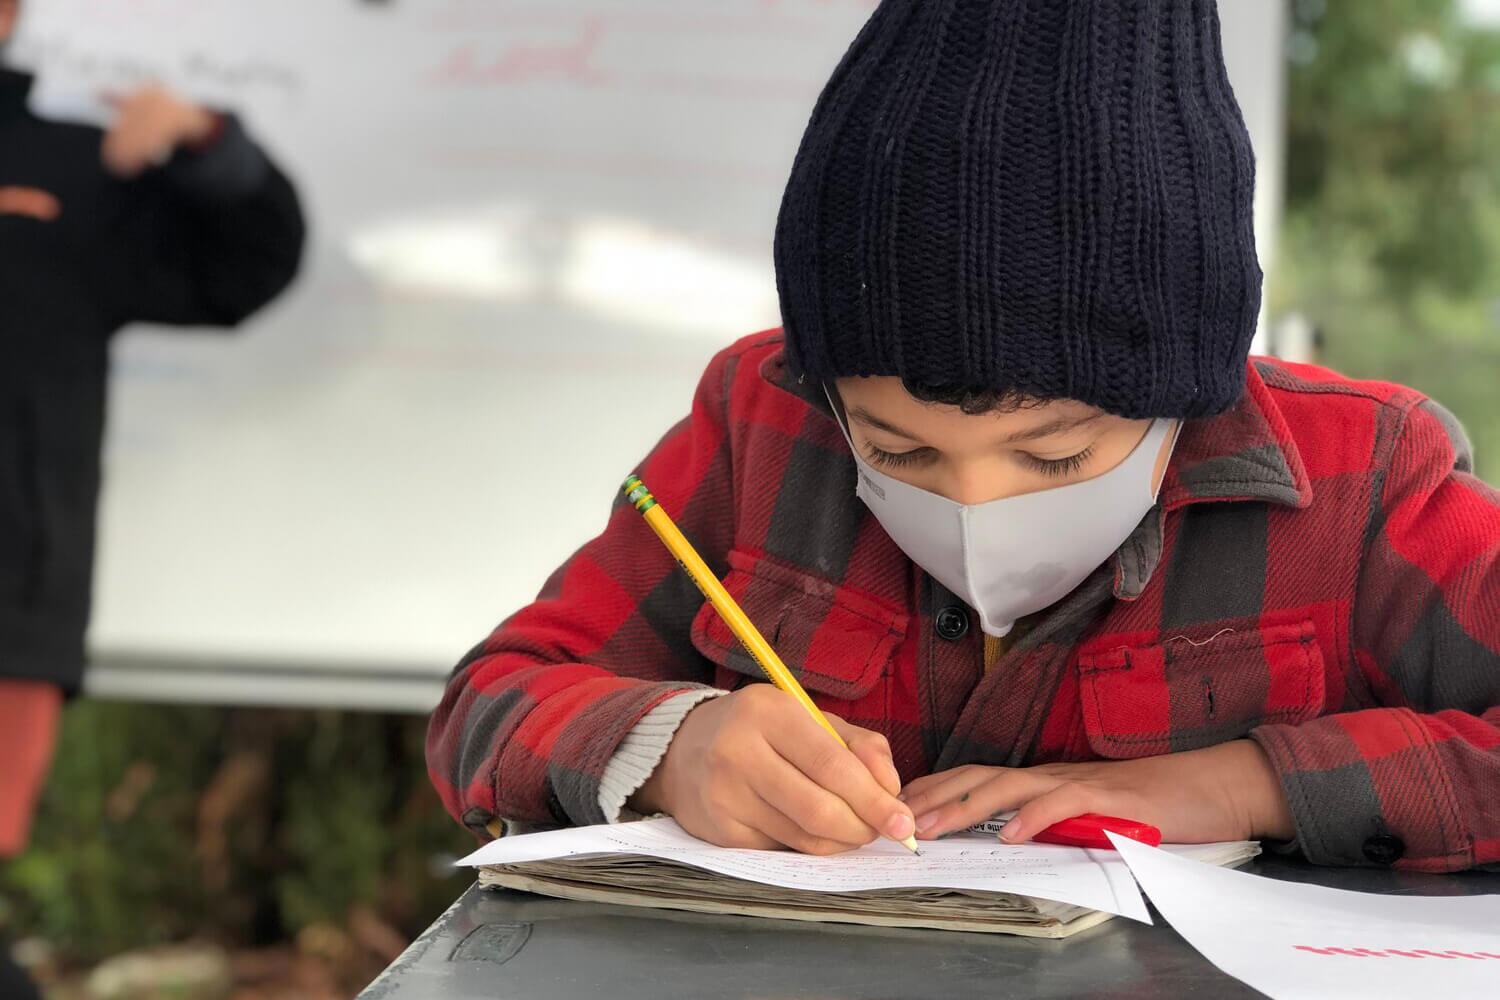 Boy with a face mask writing in a notebook.